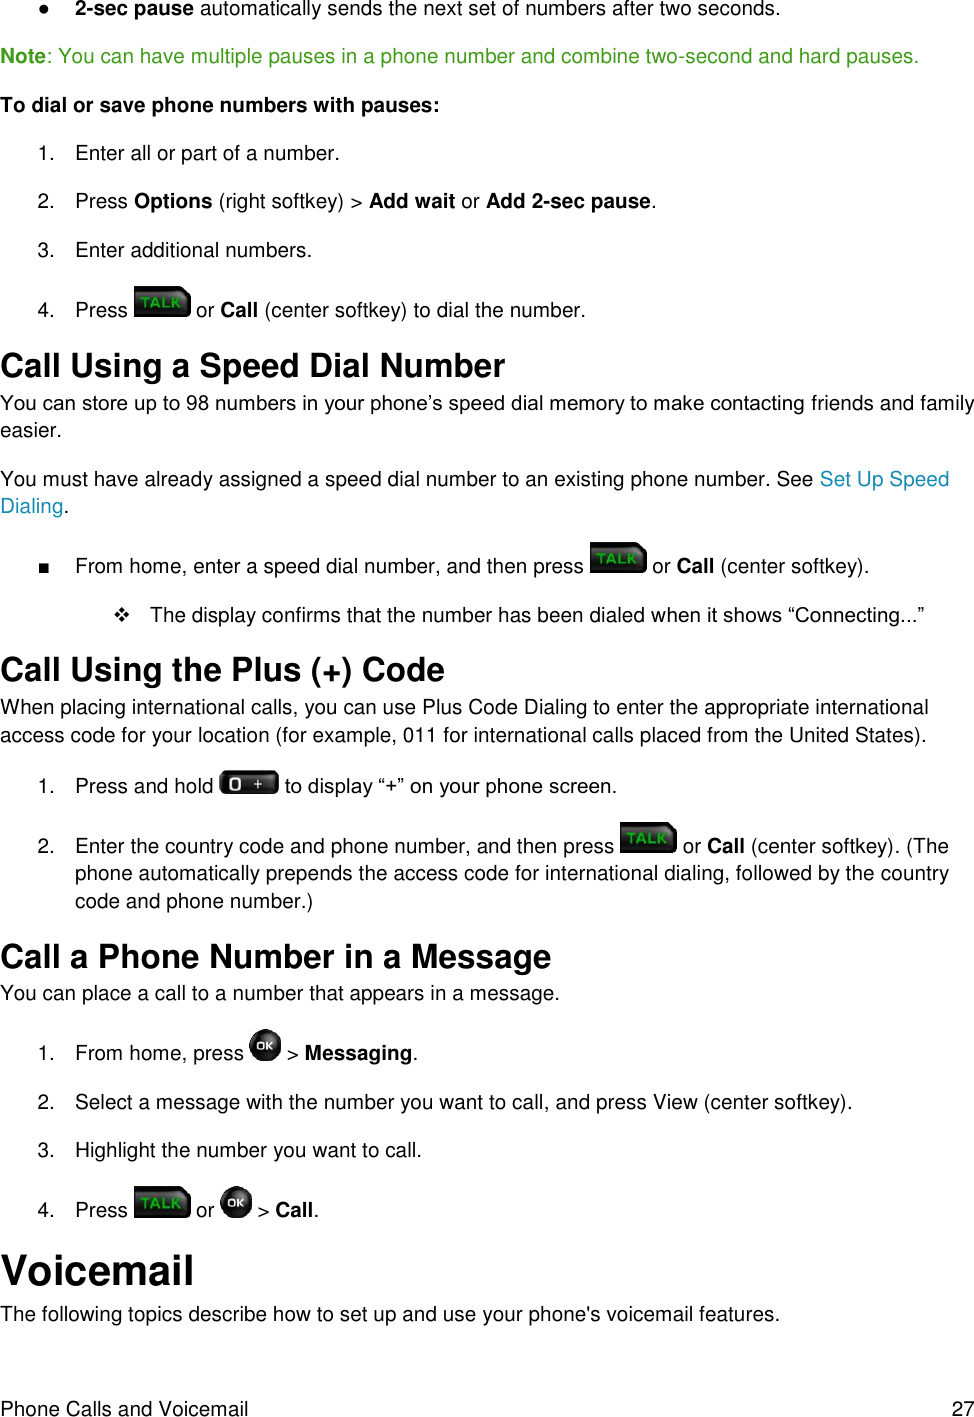 Phone Calls and Voicemail  27 ● 2-sec pause automatically sends the next set of numbers after two seconds. Note: You can have multiple pauses in a phone number and combine two-second and hard pauses. To dial or save phone numbers with pauses: 1.  Enter all or part of a number. 2.  Press Options (right softkey) &gt; Add wait or Add 2-sec pause. 3.  Enter additional numbers. 4.  Press   or Call (center softkey) to dial the number. Call Using a Speed Dial Number You can store up to 98 numbers in your phone’s speed dial memory to make contacting friends and family easier. You must have already assigned a speed dial number to an existing phone number. See Set Up Speed Dialing. ■  From home, enter a speed dial number, and then press   or Call (center softkey).   The display confirms that the number has been dialed when it shows “Connecting...” Call Using the Plus (+) Code When placing international calls, you can use Plus Code Dialing to enter the appropriate international access code for your location (for example, 011 for international calls placed from the United States). 1.  Press and hold   to display “+” on your phone screen. 2.  Enter the country code and phone number, and then press   or Call (center softkey). (The phone automatically prepends the access code for international dialing, followed by the country code and phone number.) Call a Phone Number in a Message You can place a call to a number that appears in a message. 1.  From home, press   &gt; Messaging. 2.  Select a message with the number you want to call, and press View (center softkey). 3.  Highlight the number you want to call. 4.  Press   or   &gt; Call. Voicemail The following topics describe how to set up and use your phone&apos;s voicemail features. 